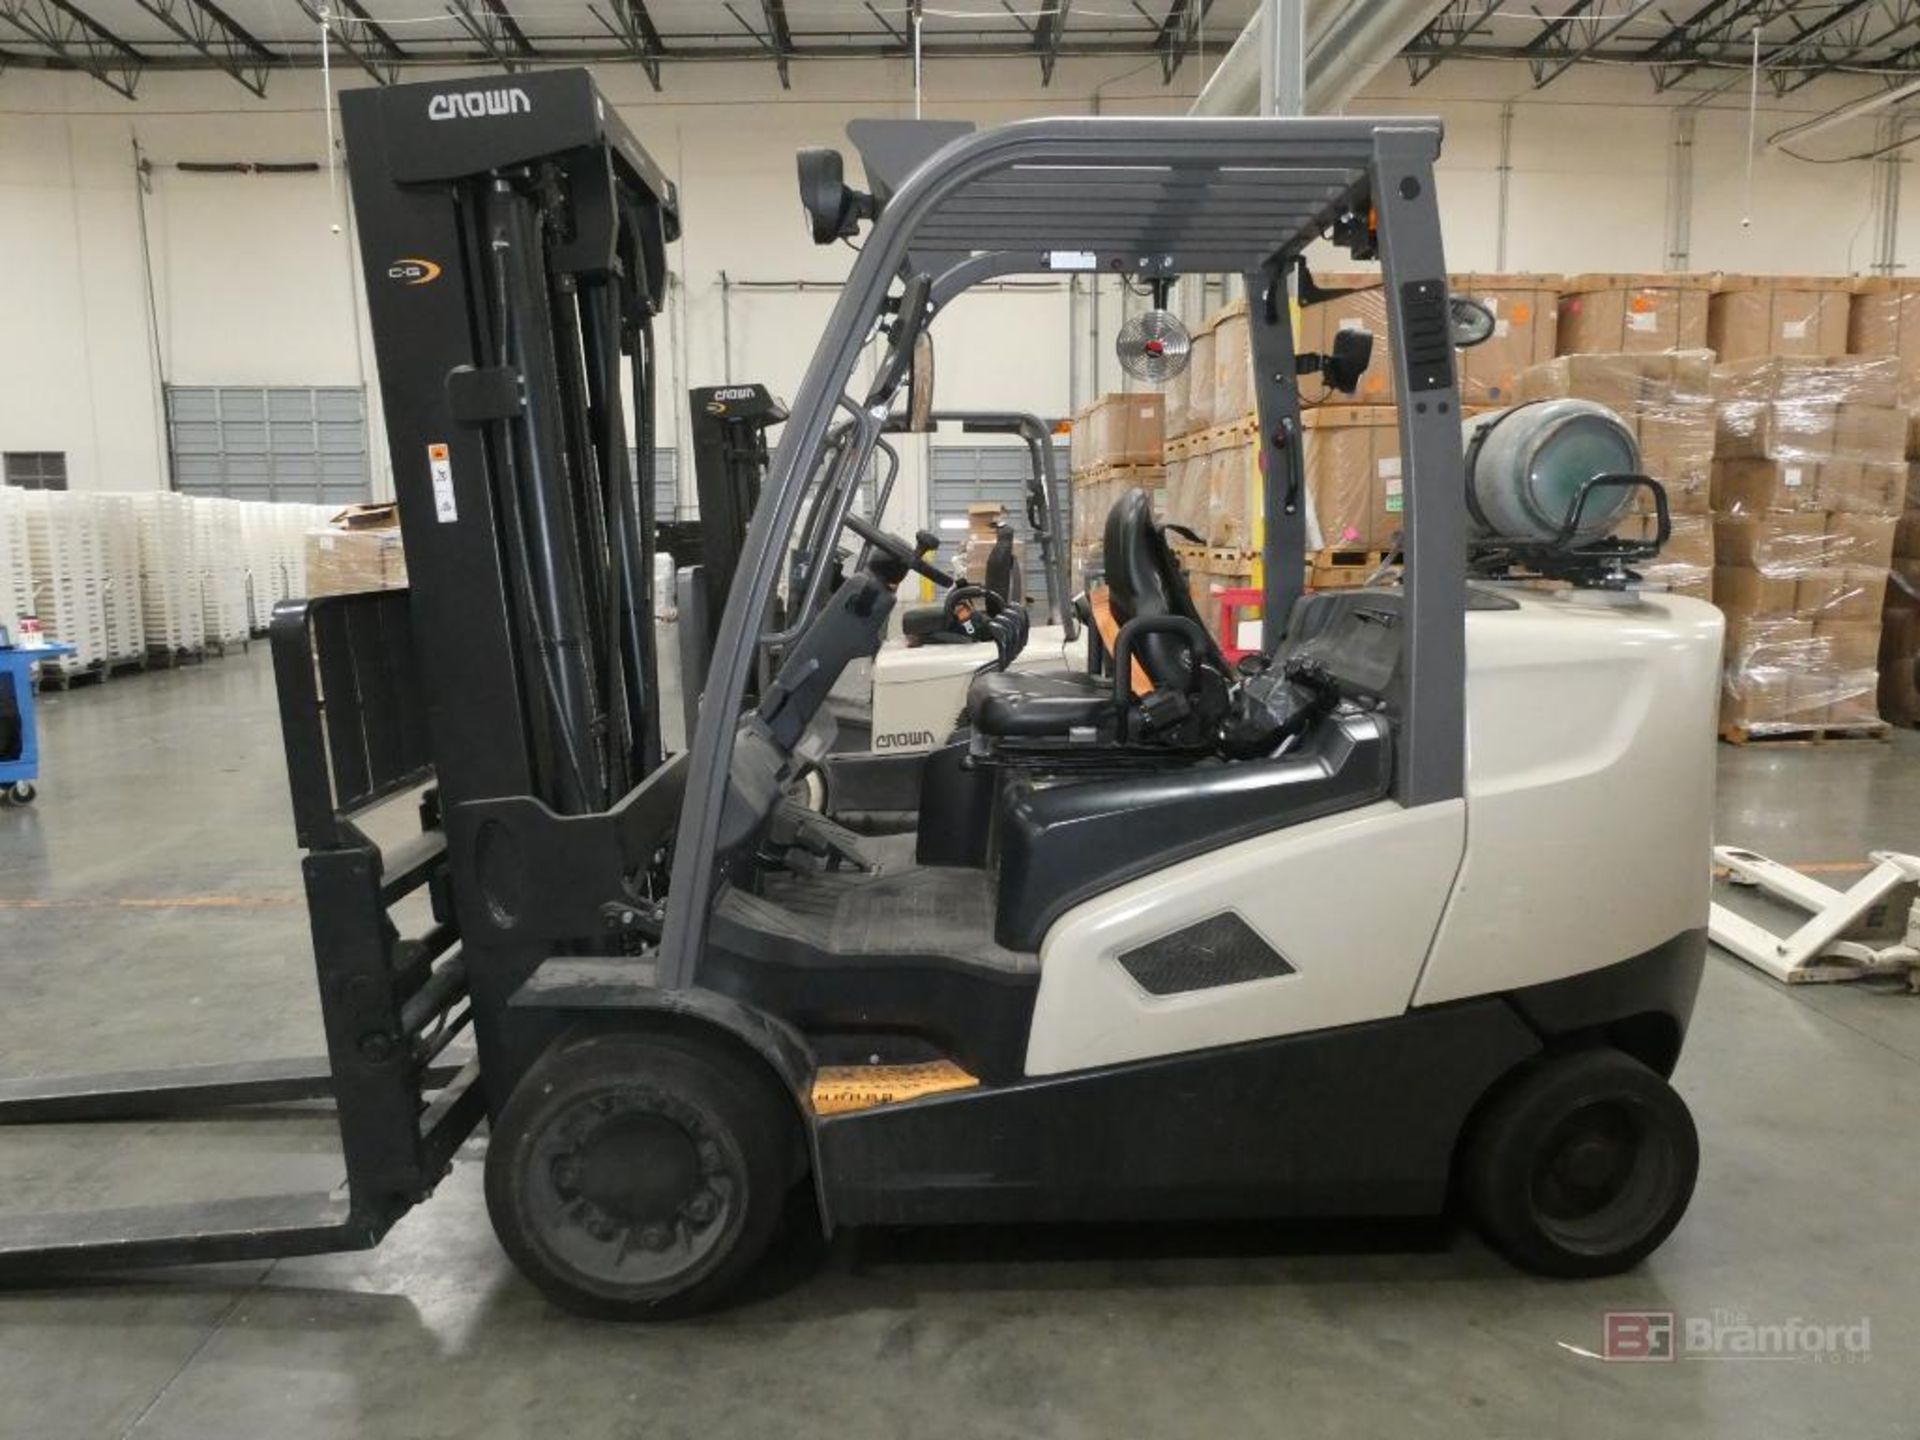 Crown Model CGC45S-9, 8500LB Fork Truck - Image 8 of 8